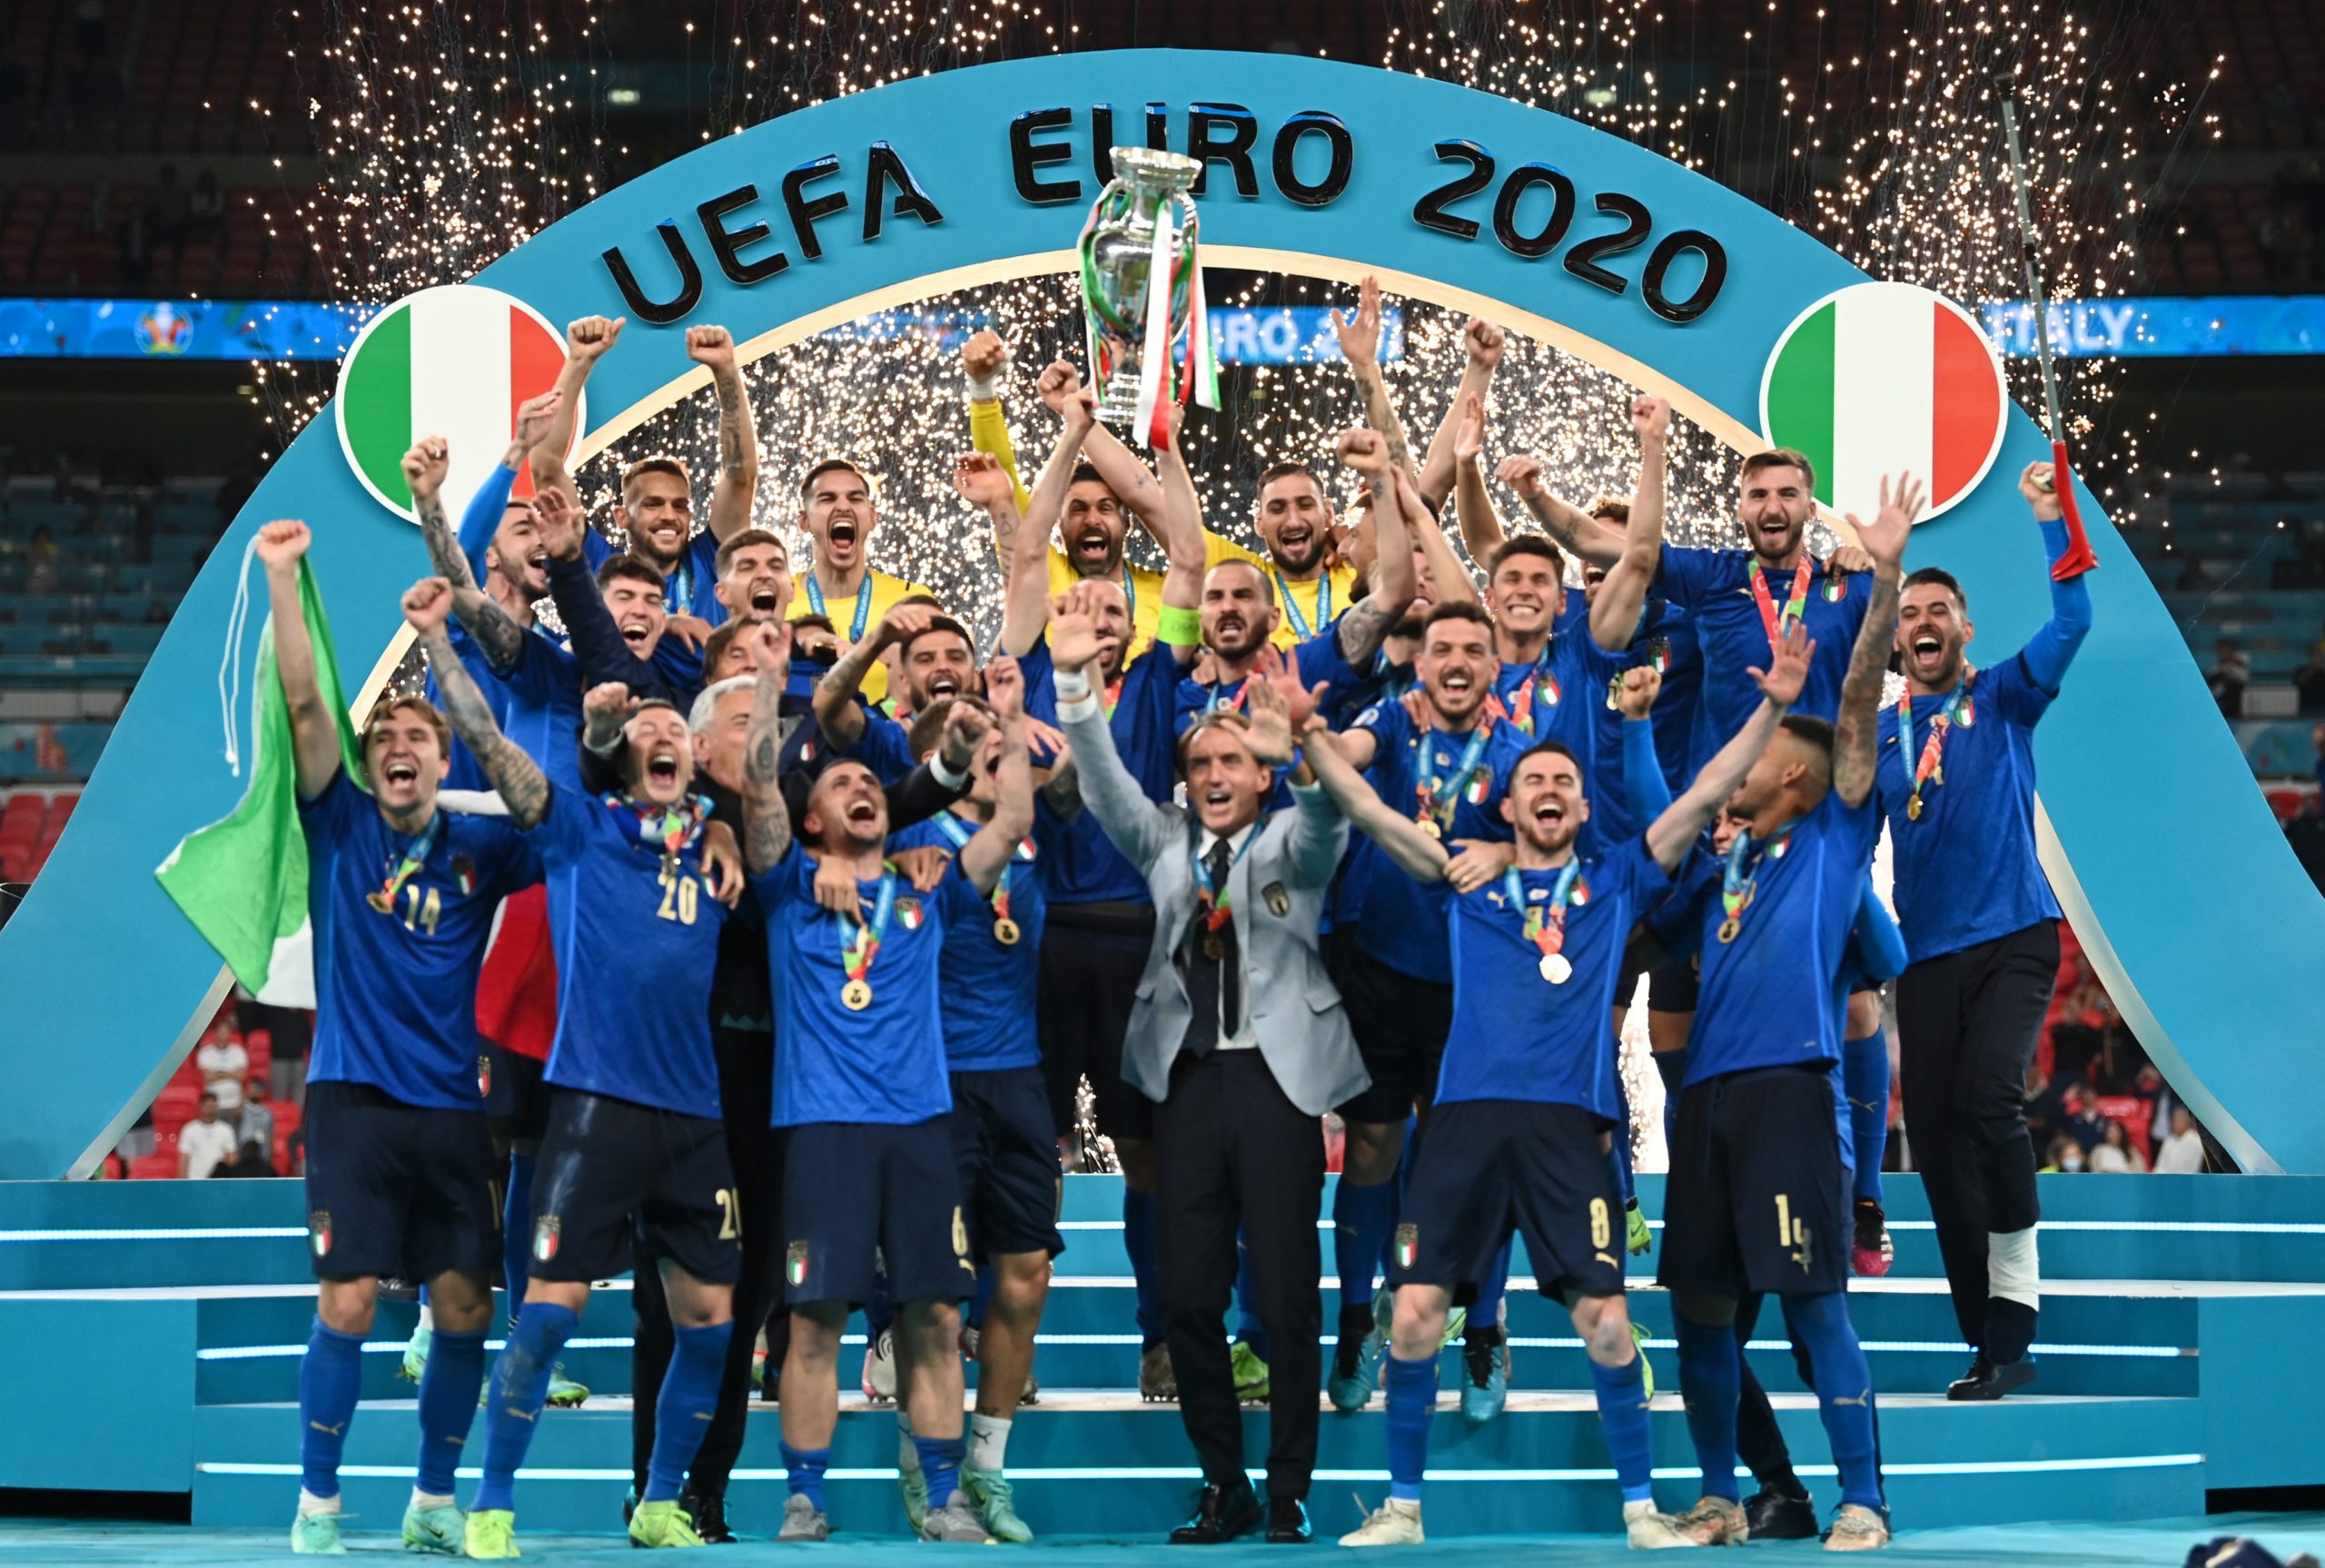 Euro 2020 Final: Italy beat England: England's wait continues as Chiellini Italy win Euro 3-2 on penalties- As it happened at Wembley Stadium